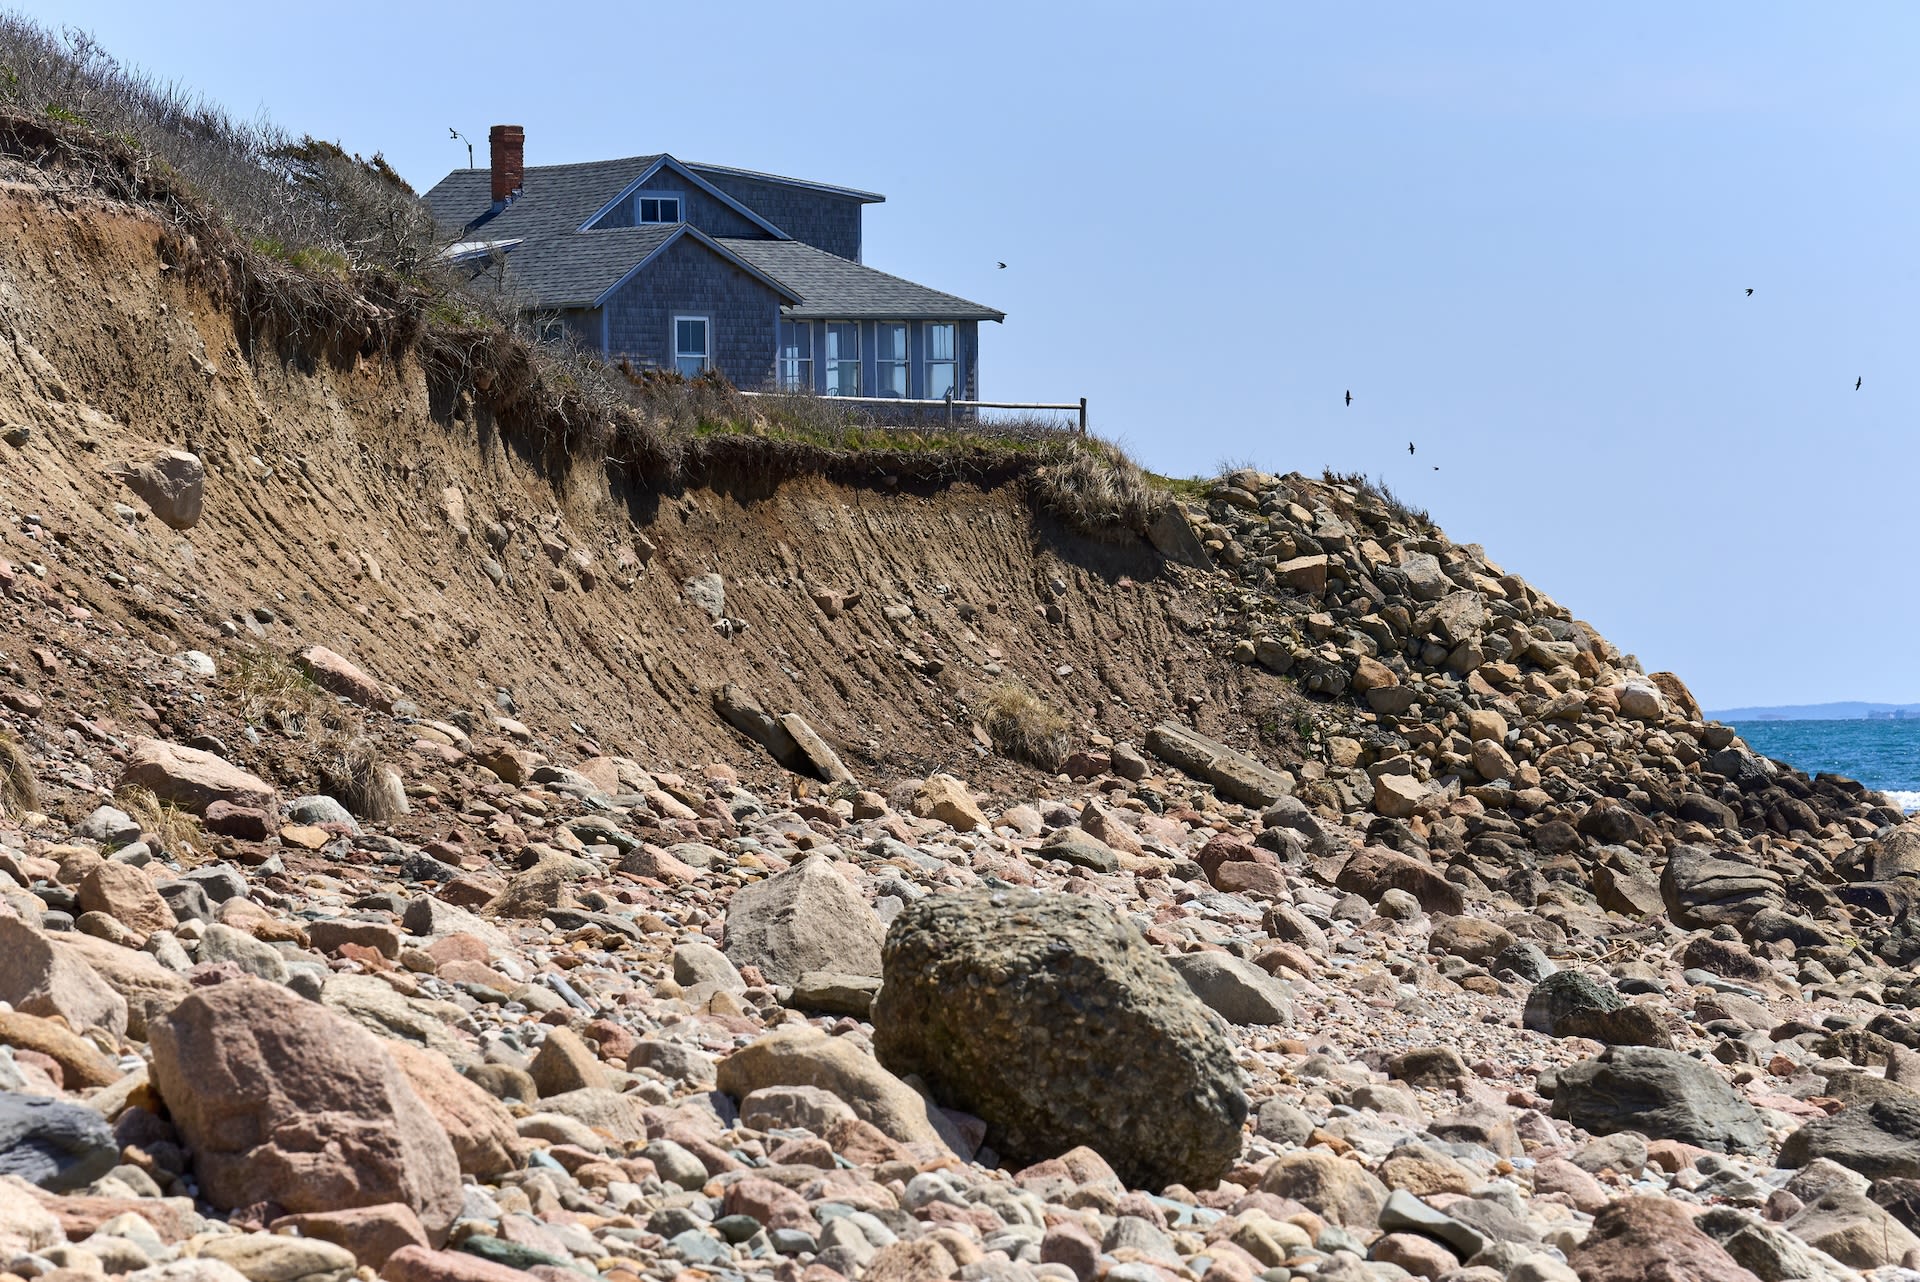 Engineers deploy 'sand motor' to protect shorefront communities from erosion — though it may be too late for some areas